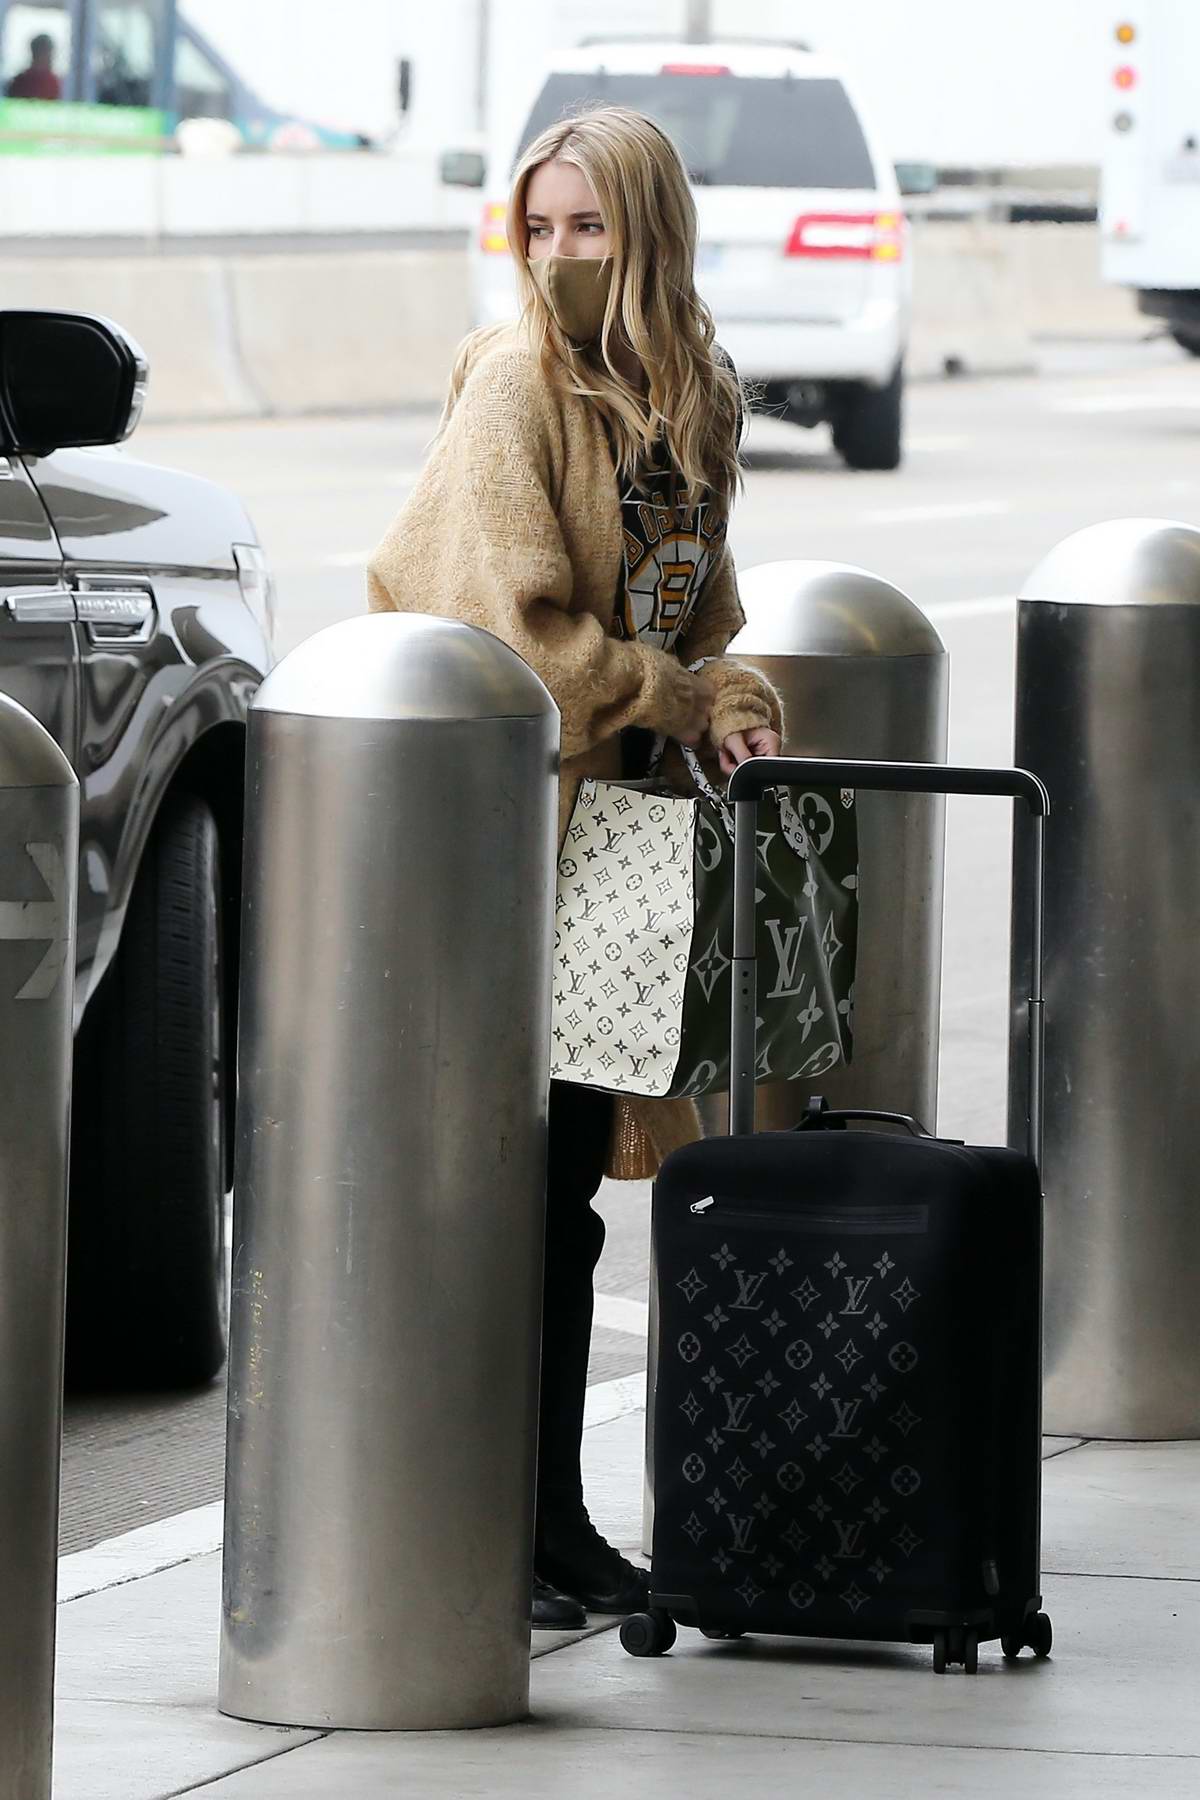 Emma Roberts carefully inspects her Luitton luggage as she arrives at  airport